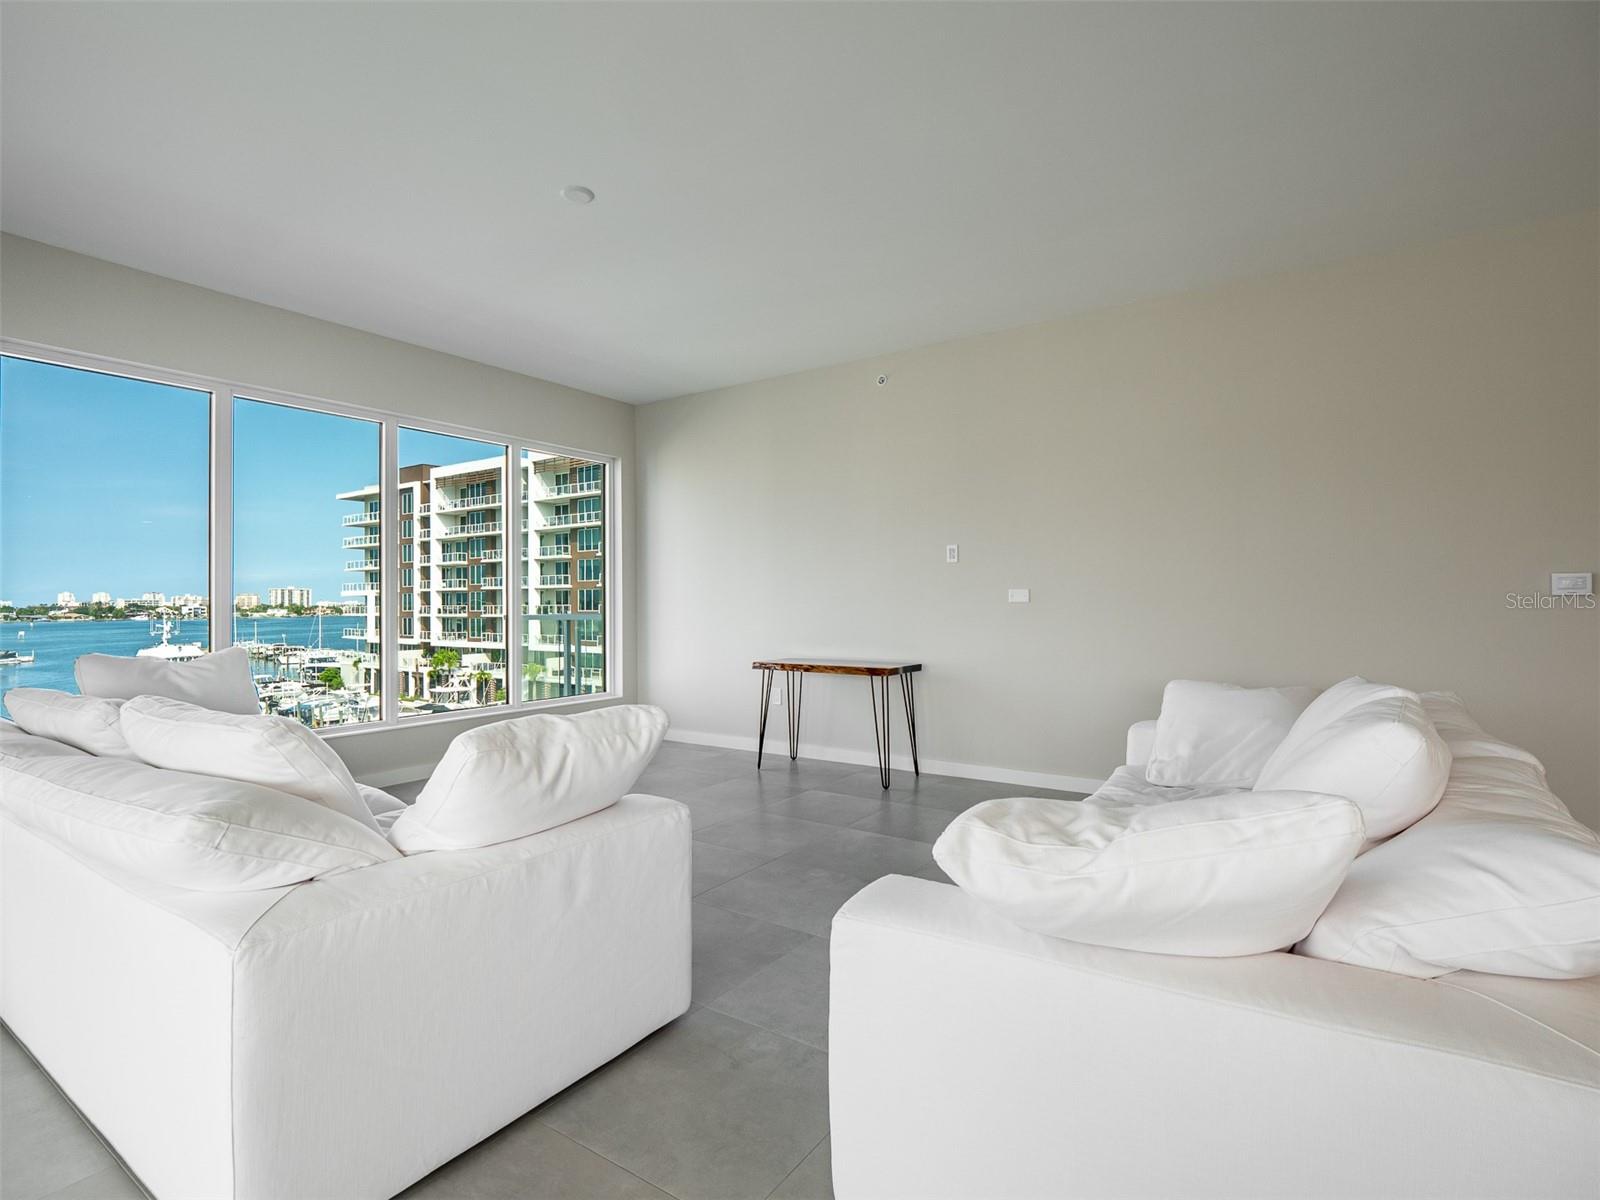 Luxury awaits in the living room overlooking the marina and intracoastal waterway